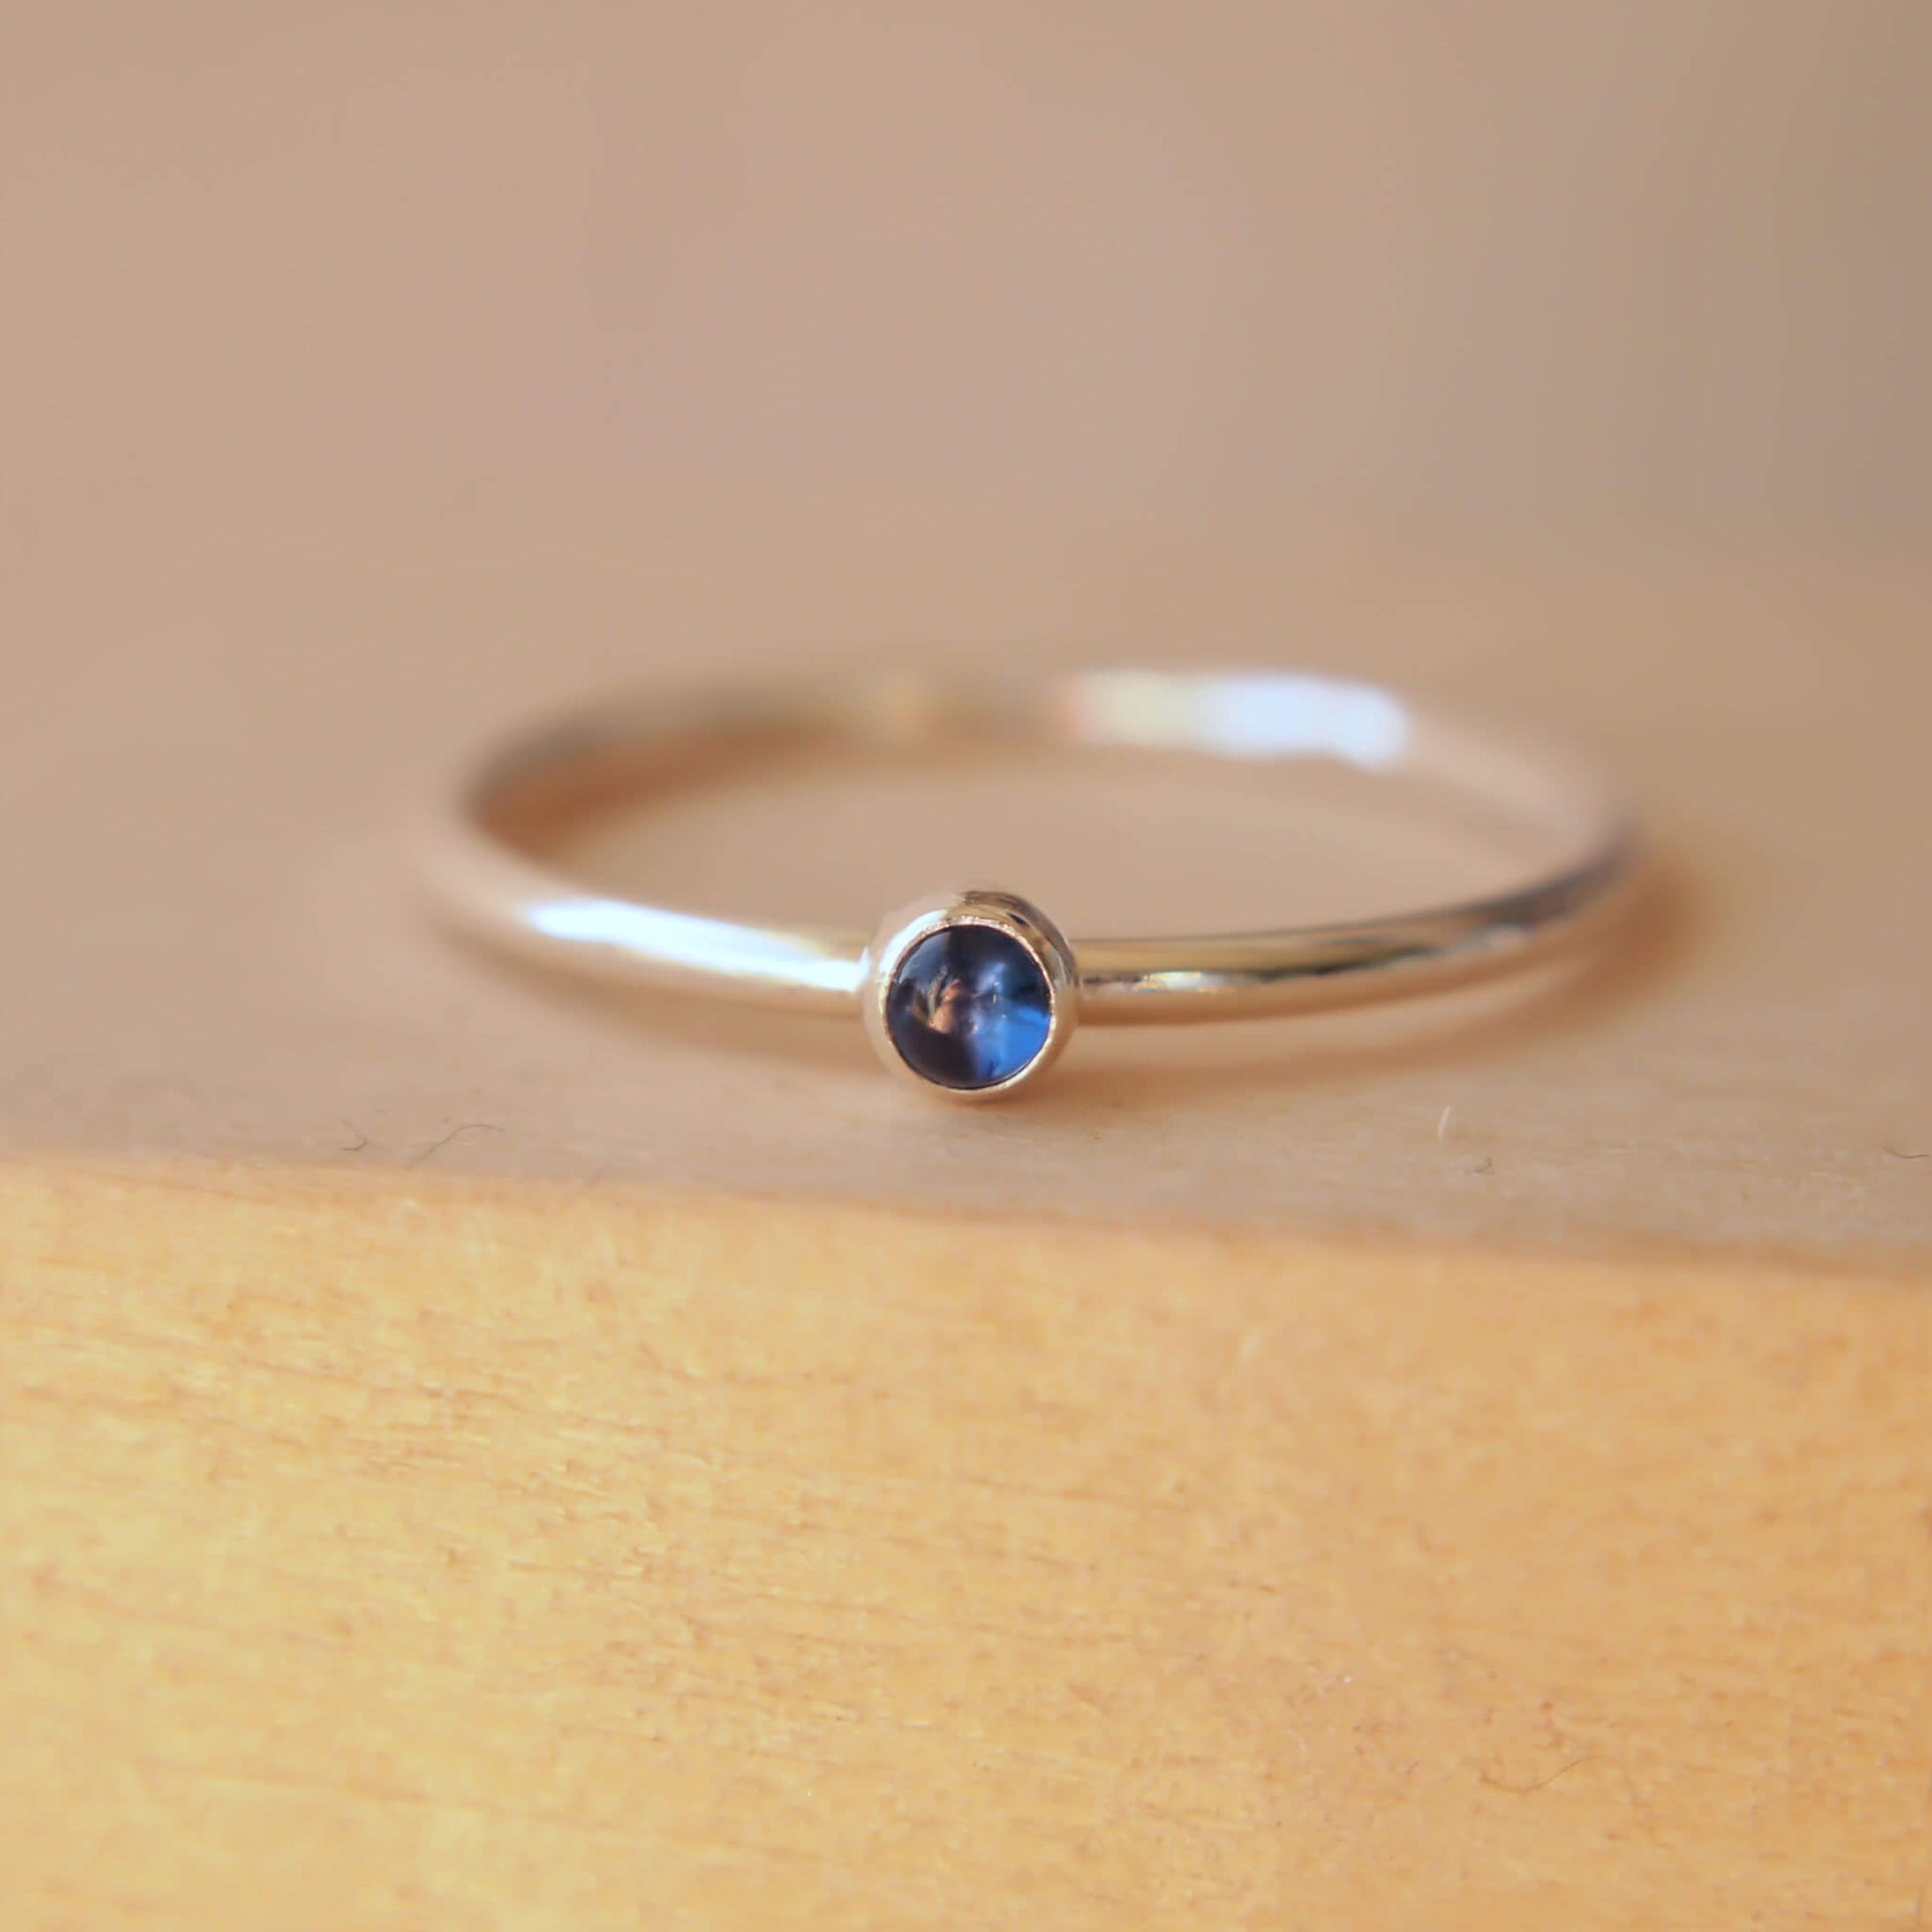 Sapphire solitaire ring with a small gemstone handmade in Scotland by maram jewellery